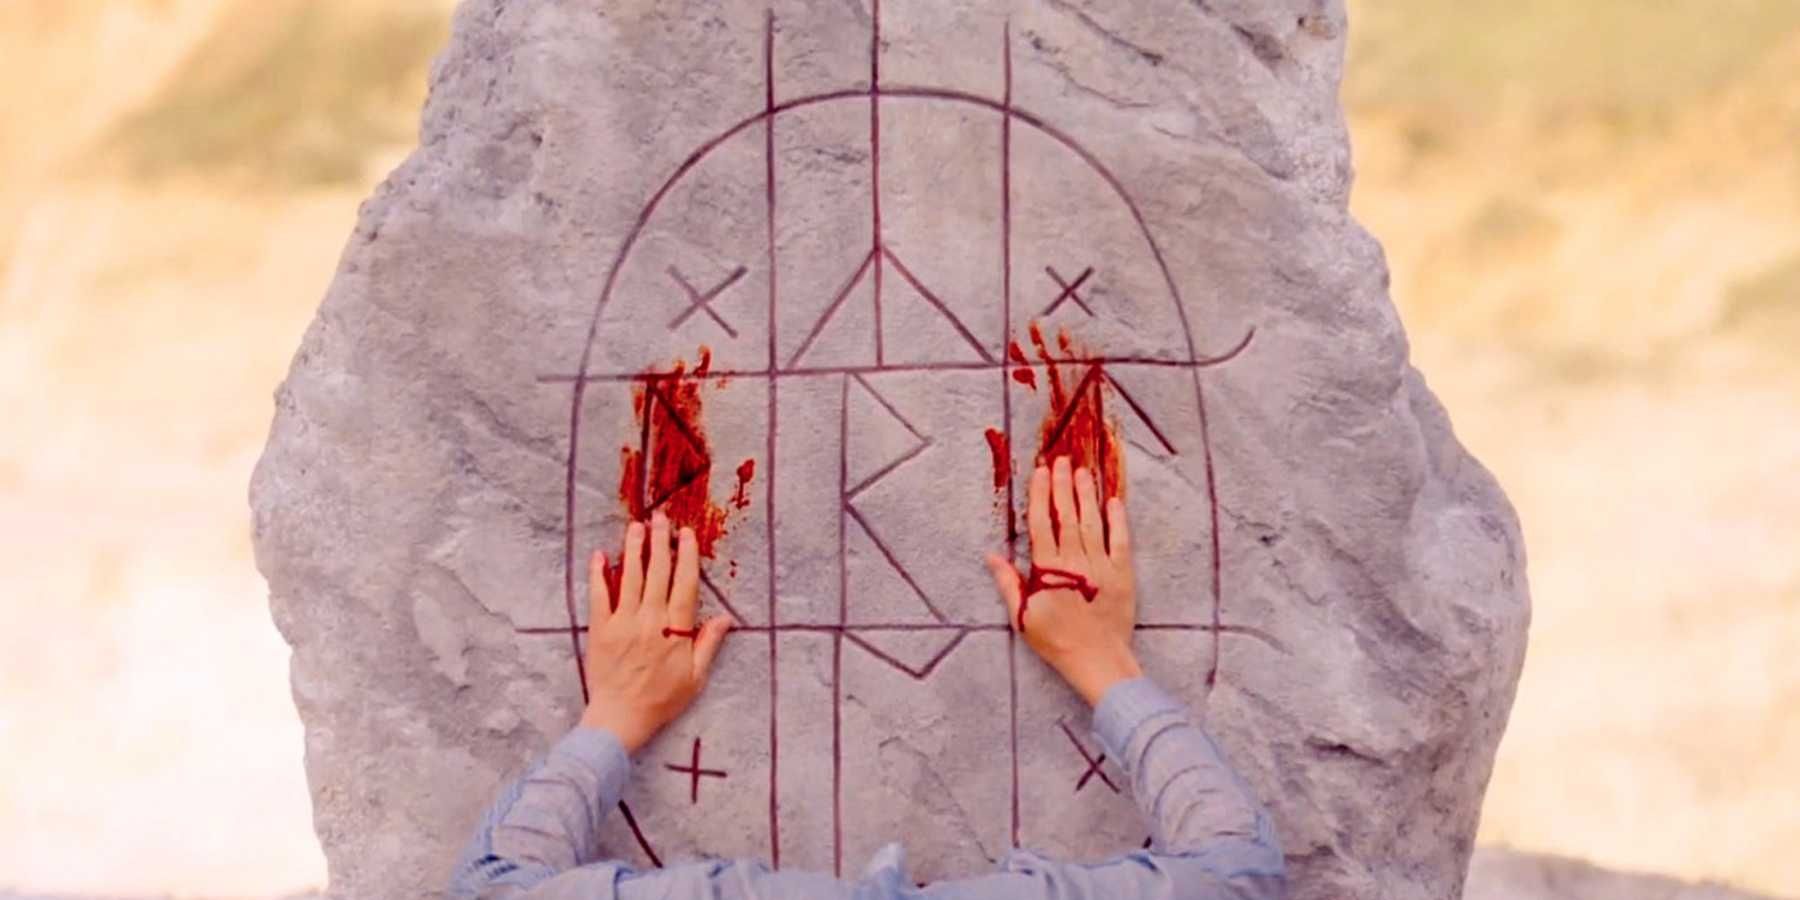 Bloody hands on a runic symbol in Midsommar